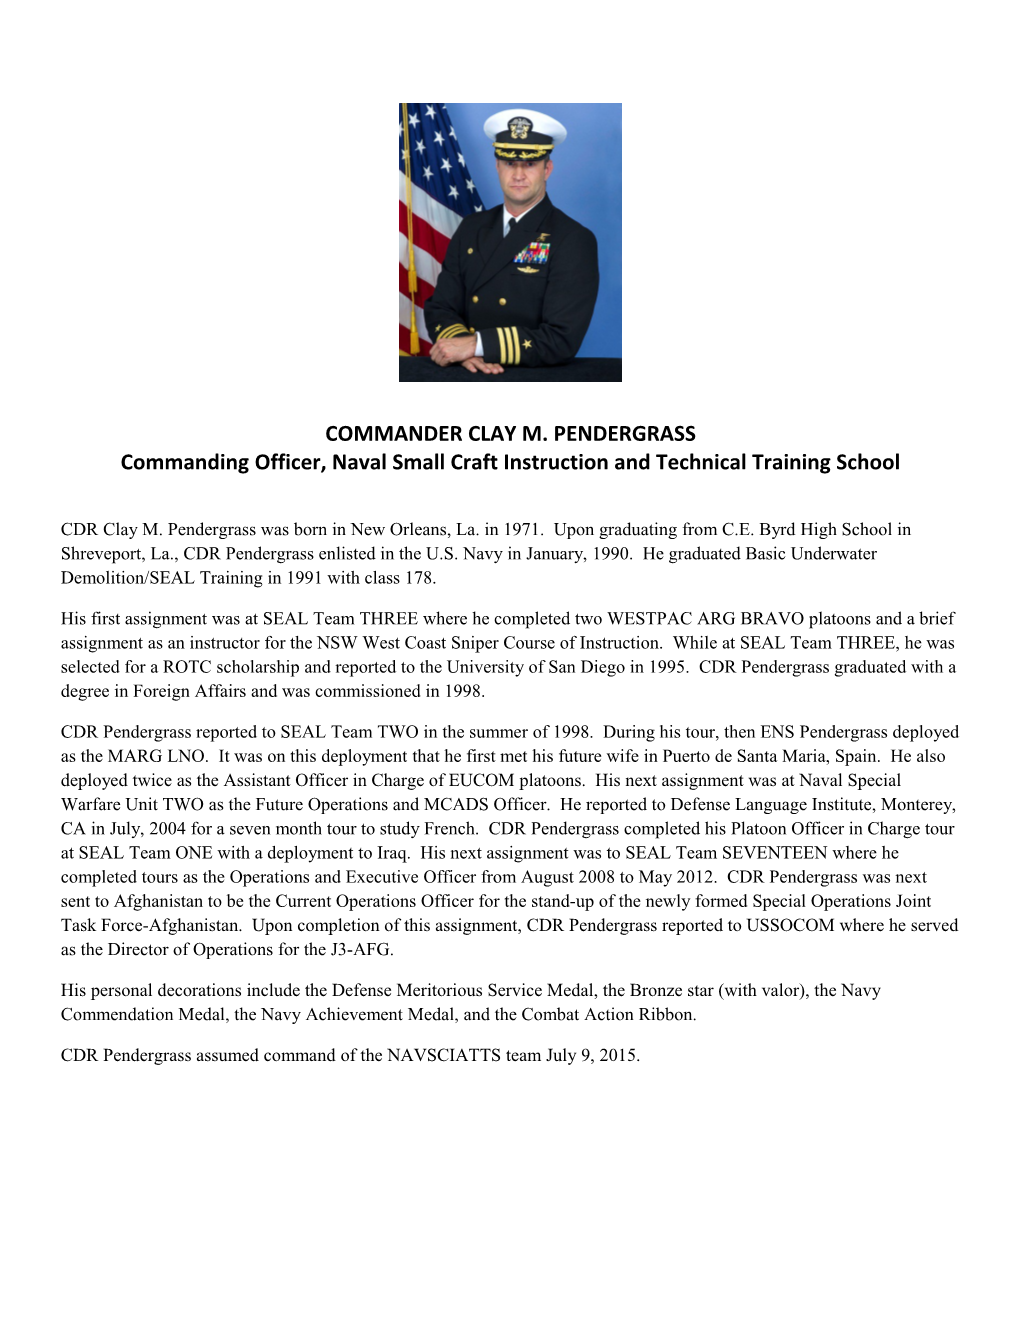 Commanding Officer, Naval Small Craft Instruction and Technical Training School